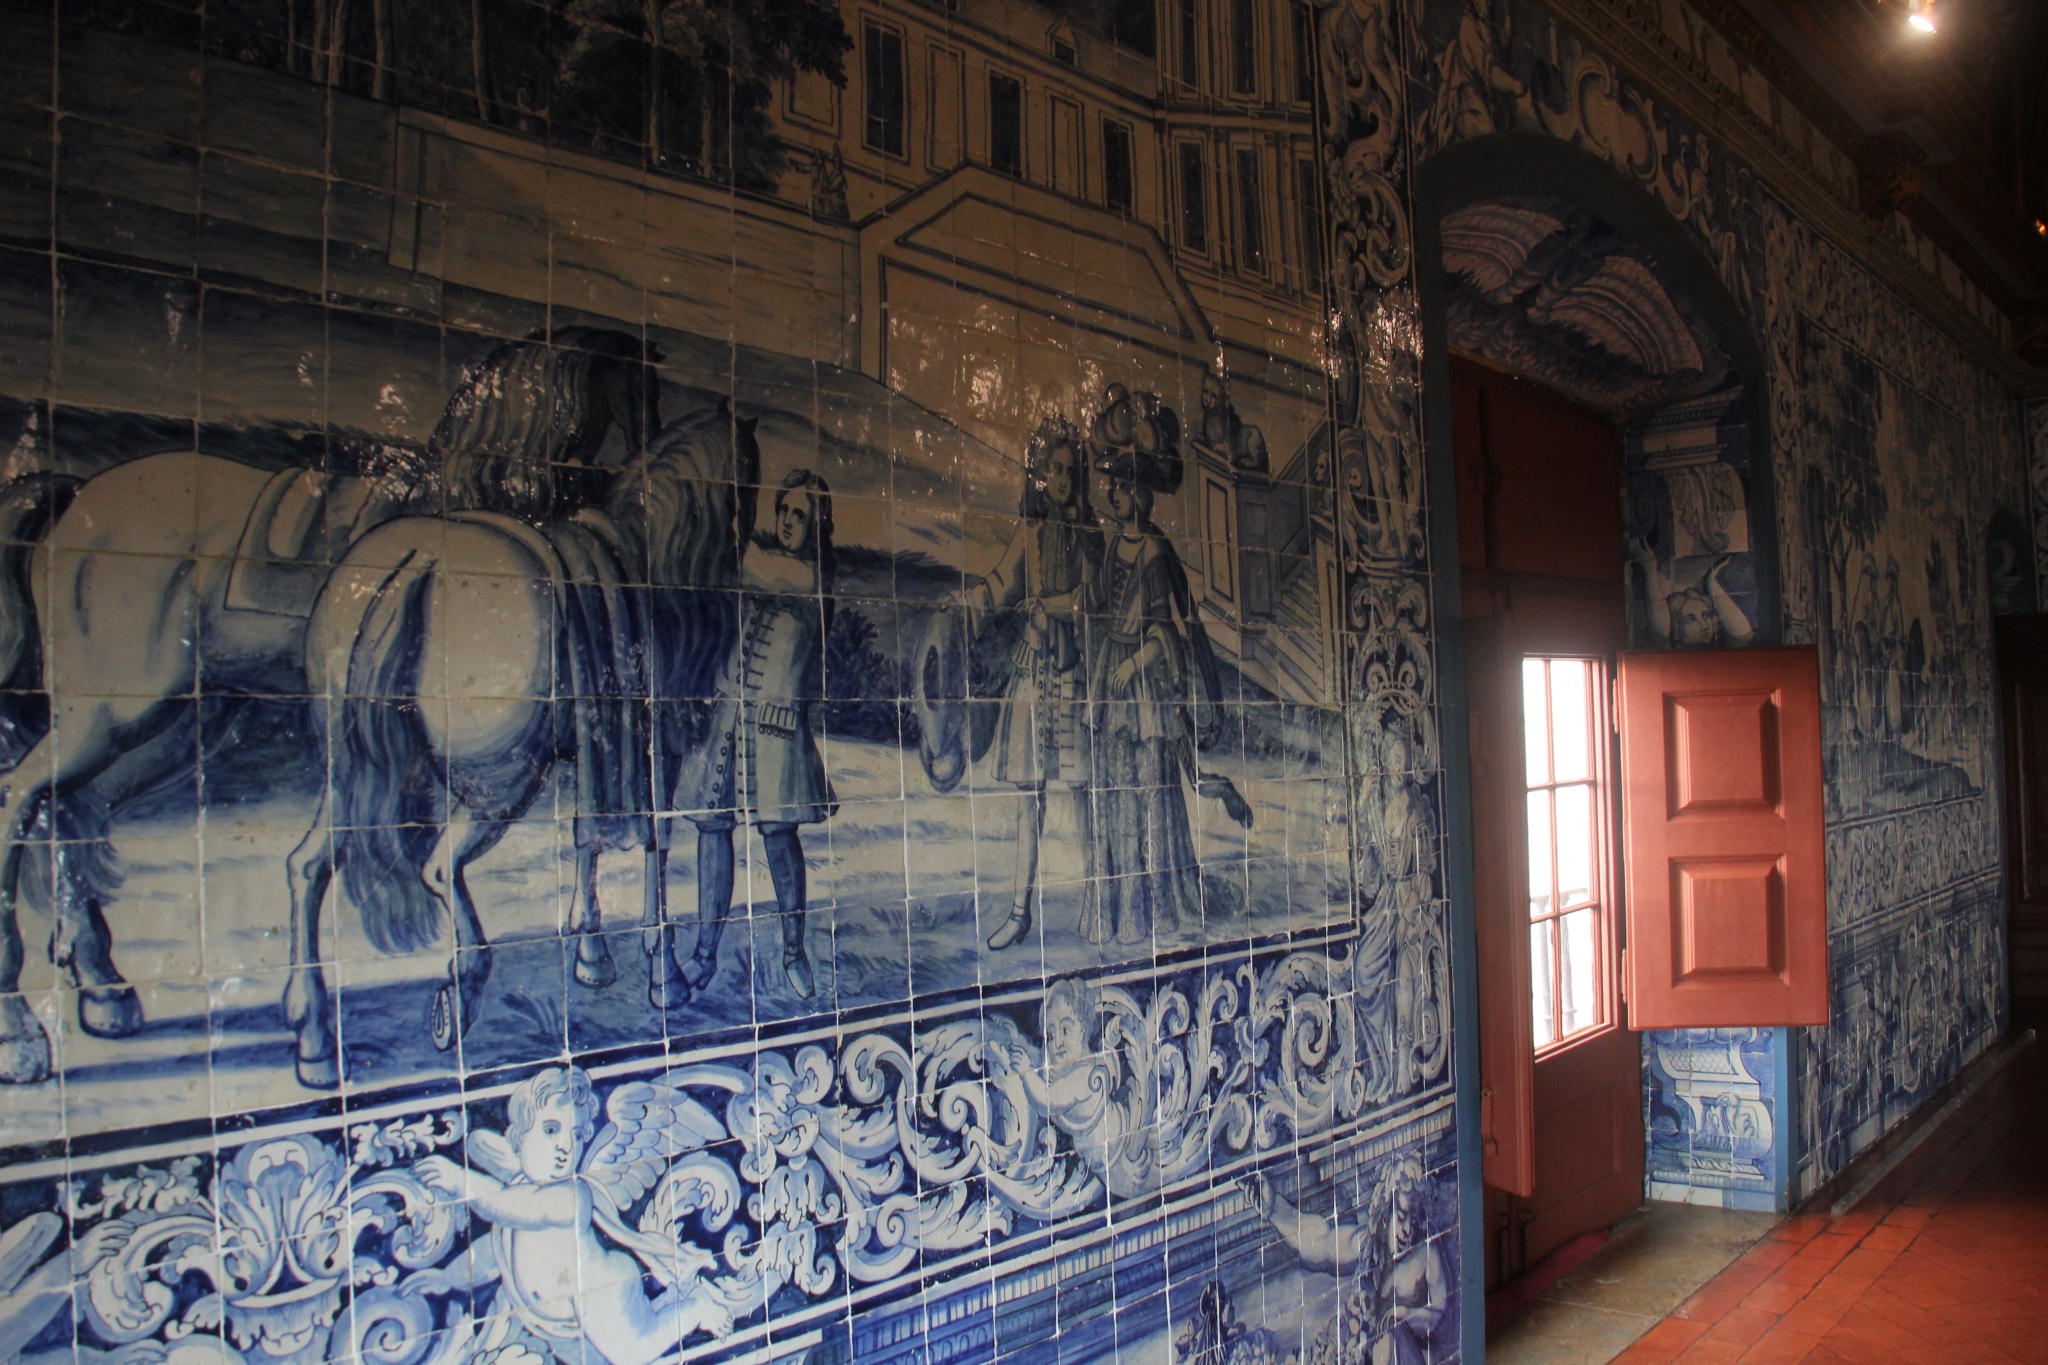 Azulejos adorn the walls of Portugal's Sintra National Palace.